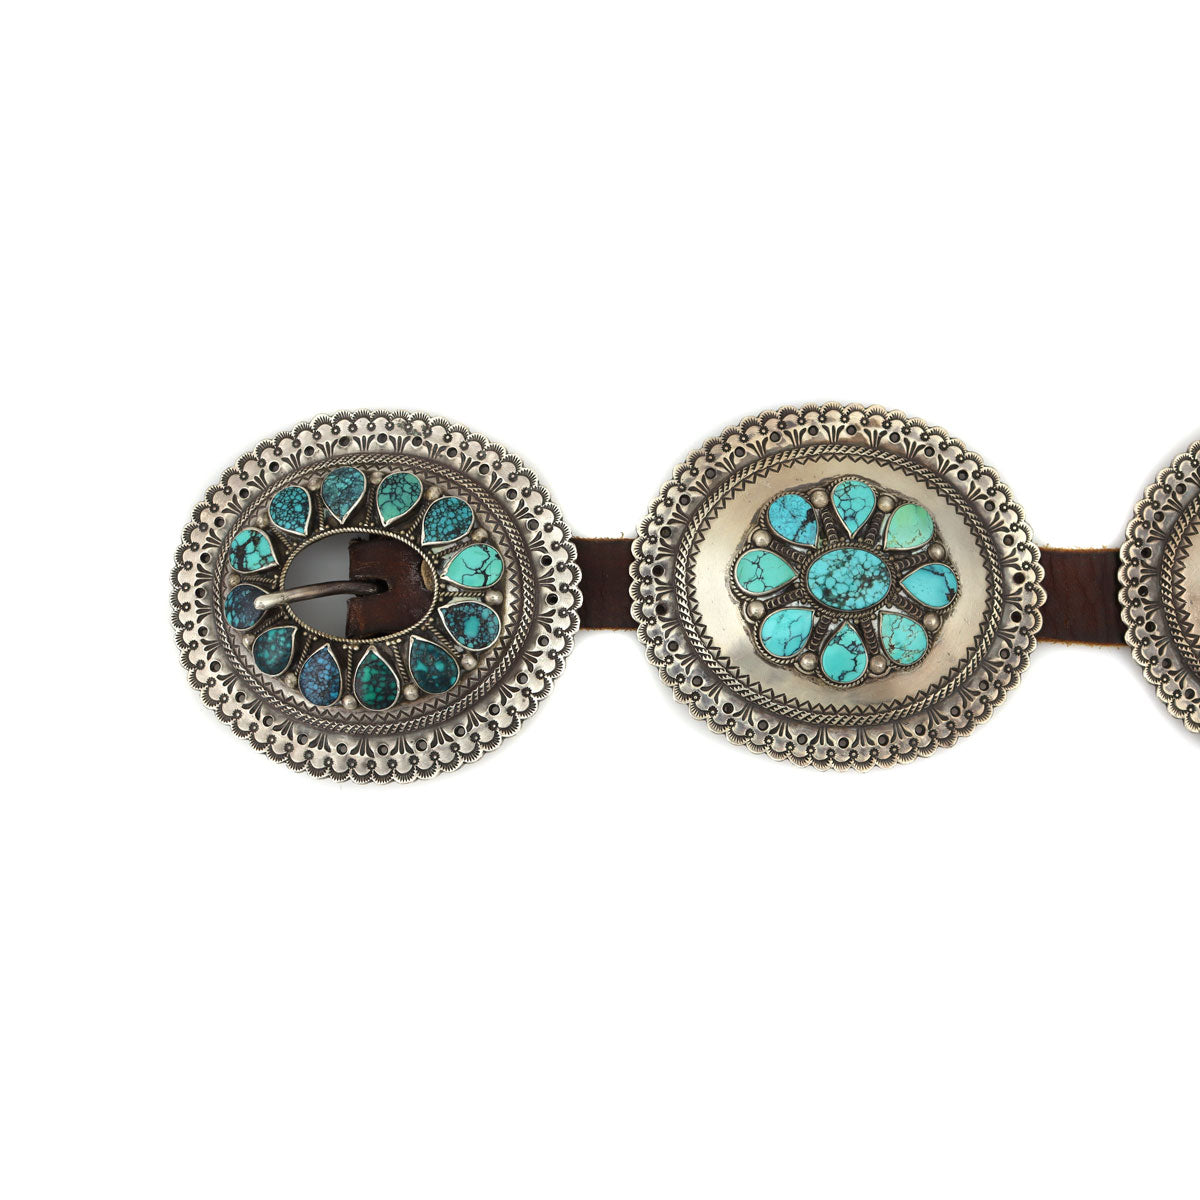 Perry Shorty (b. 1964) - Navajo Lone Mountain Turquosie, Number 8 Turquoise, Silver and Leather Belt c. 1980s, 34" to 42" waist (J91051-0921-003)2